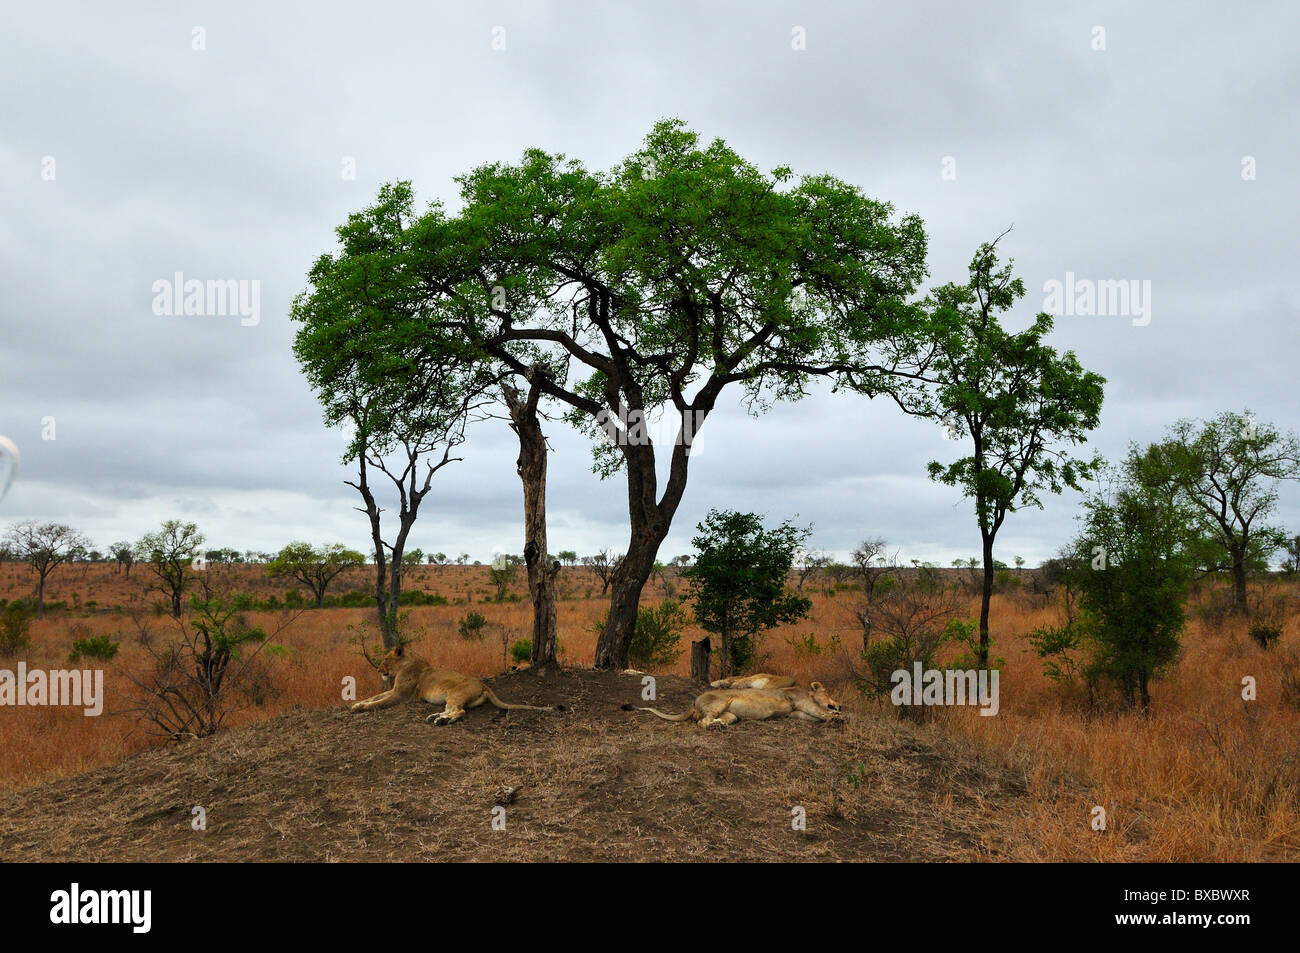 Several young adult lions resting under a tree. Kruger National Park, South Africa. Stock Photo